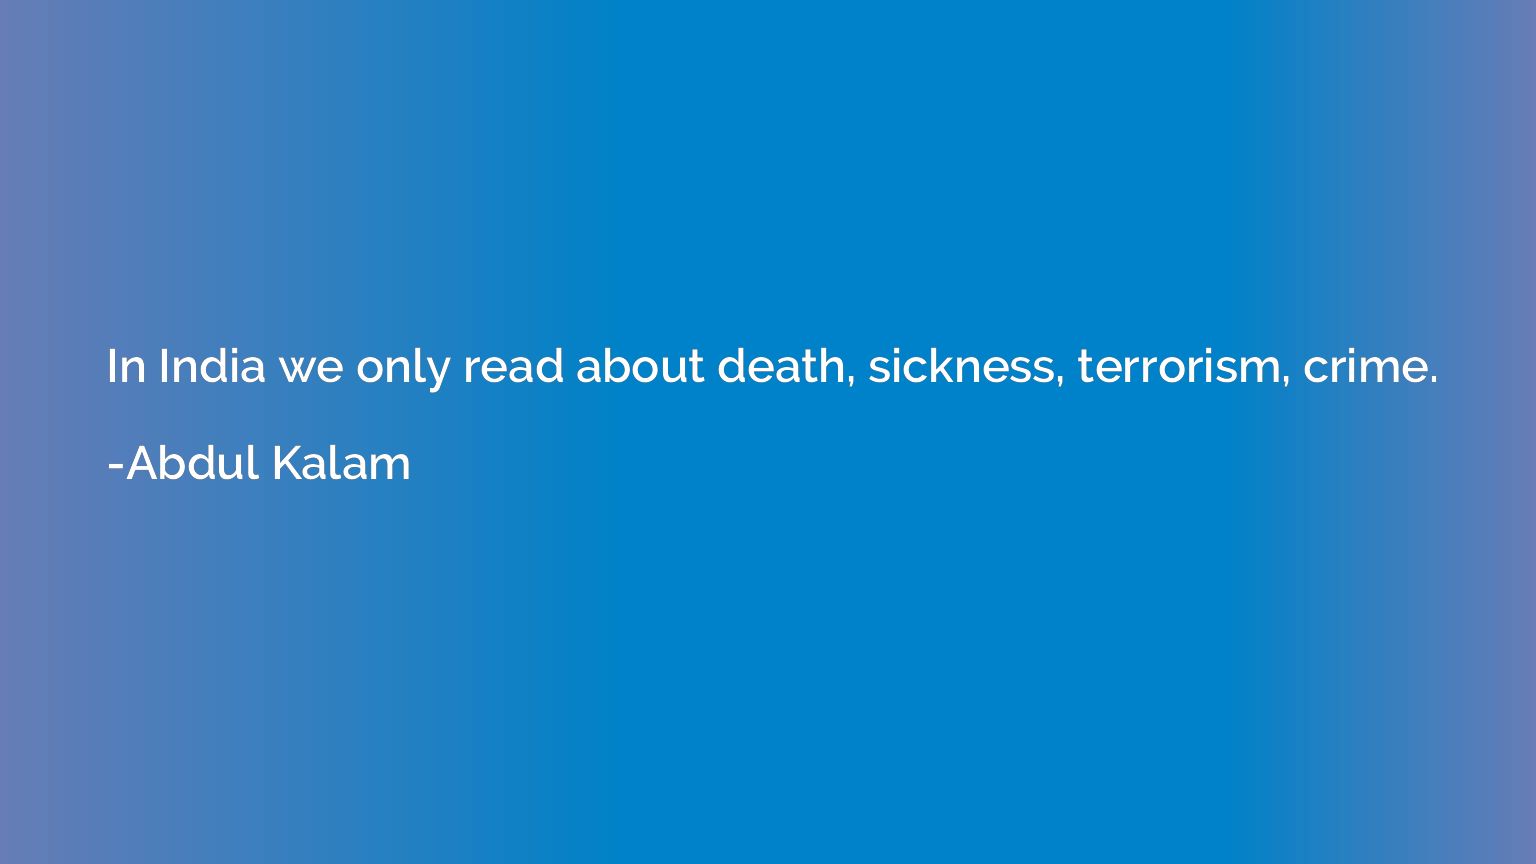 In India we only read about death, sickness, terrorism, crim